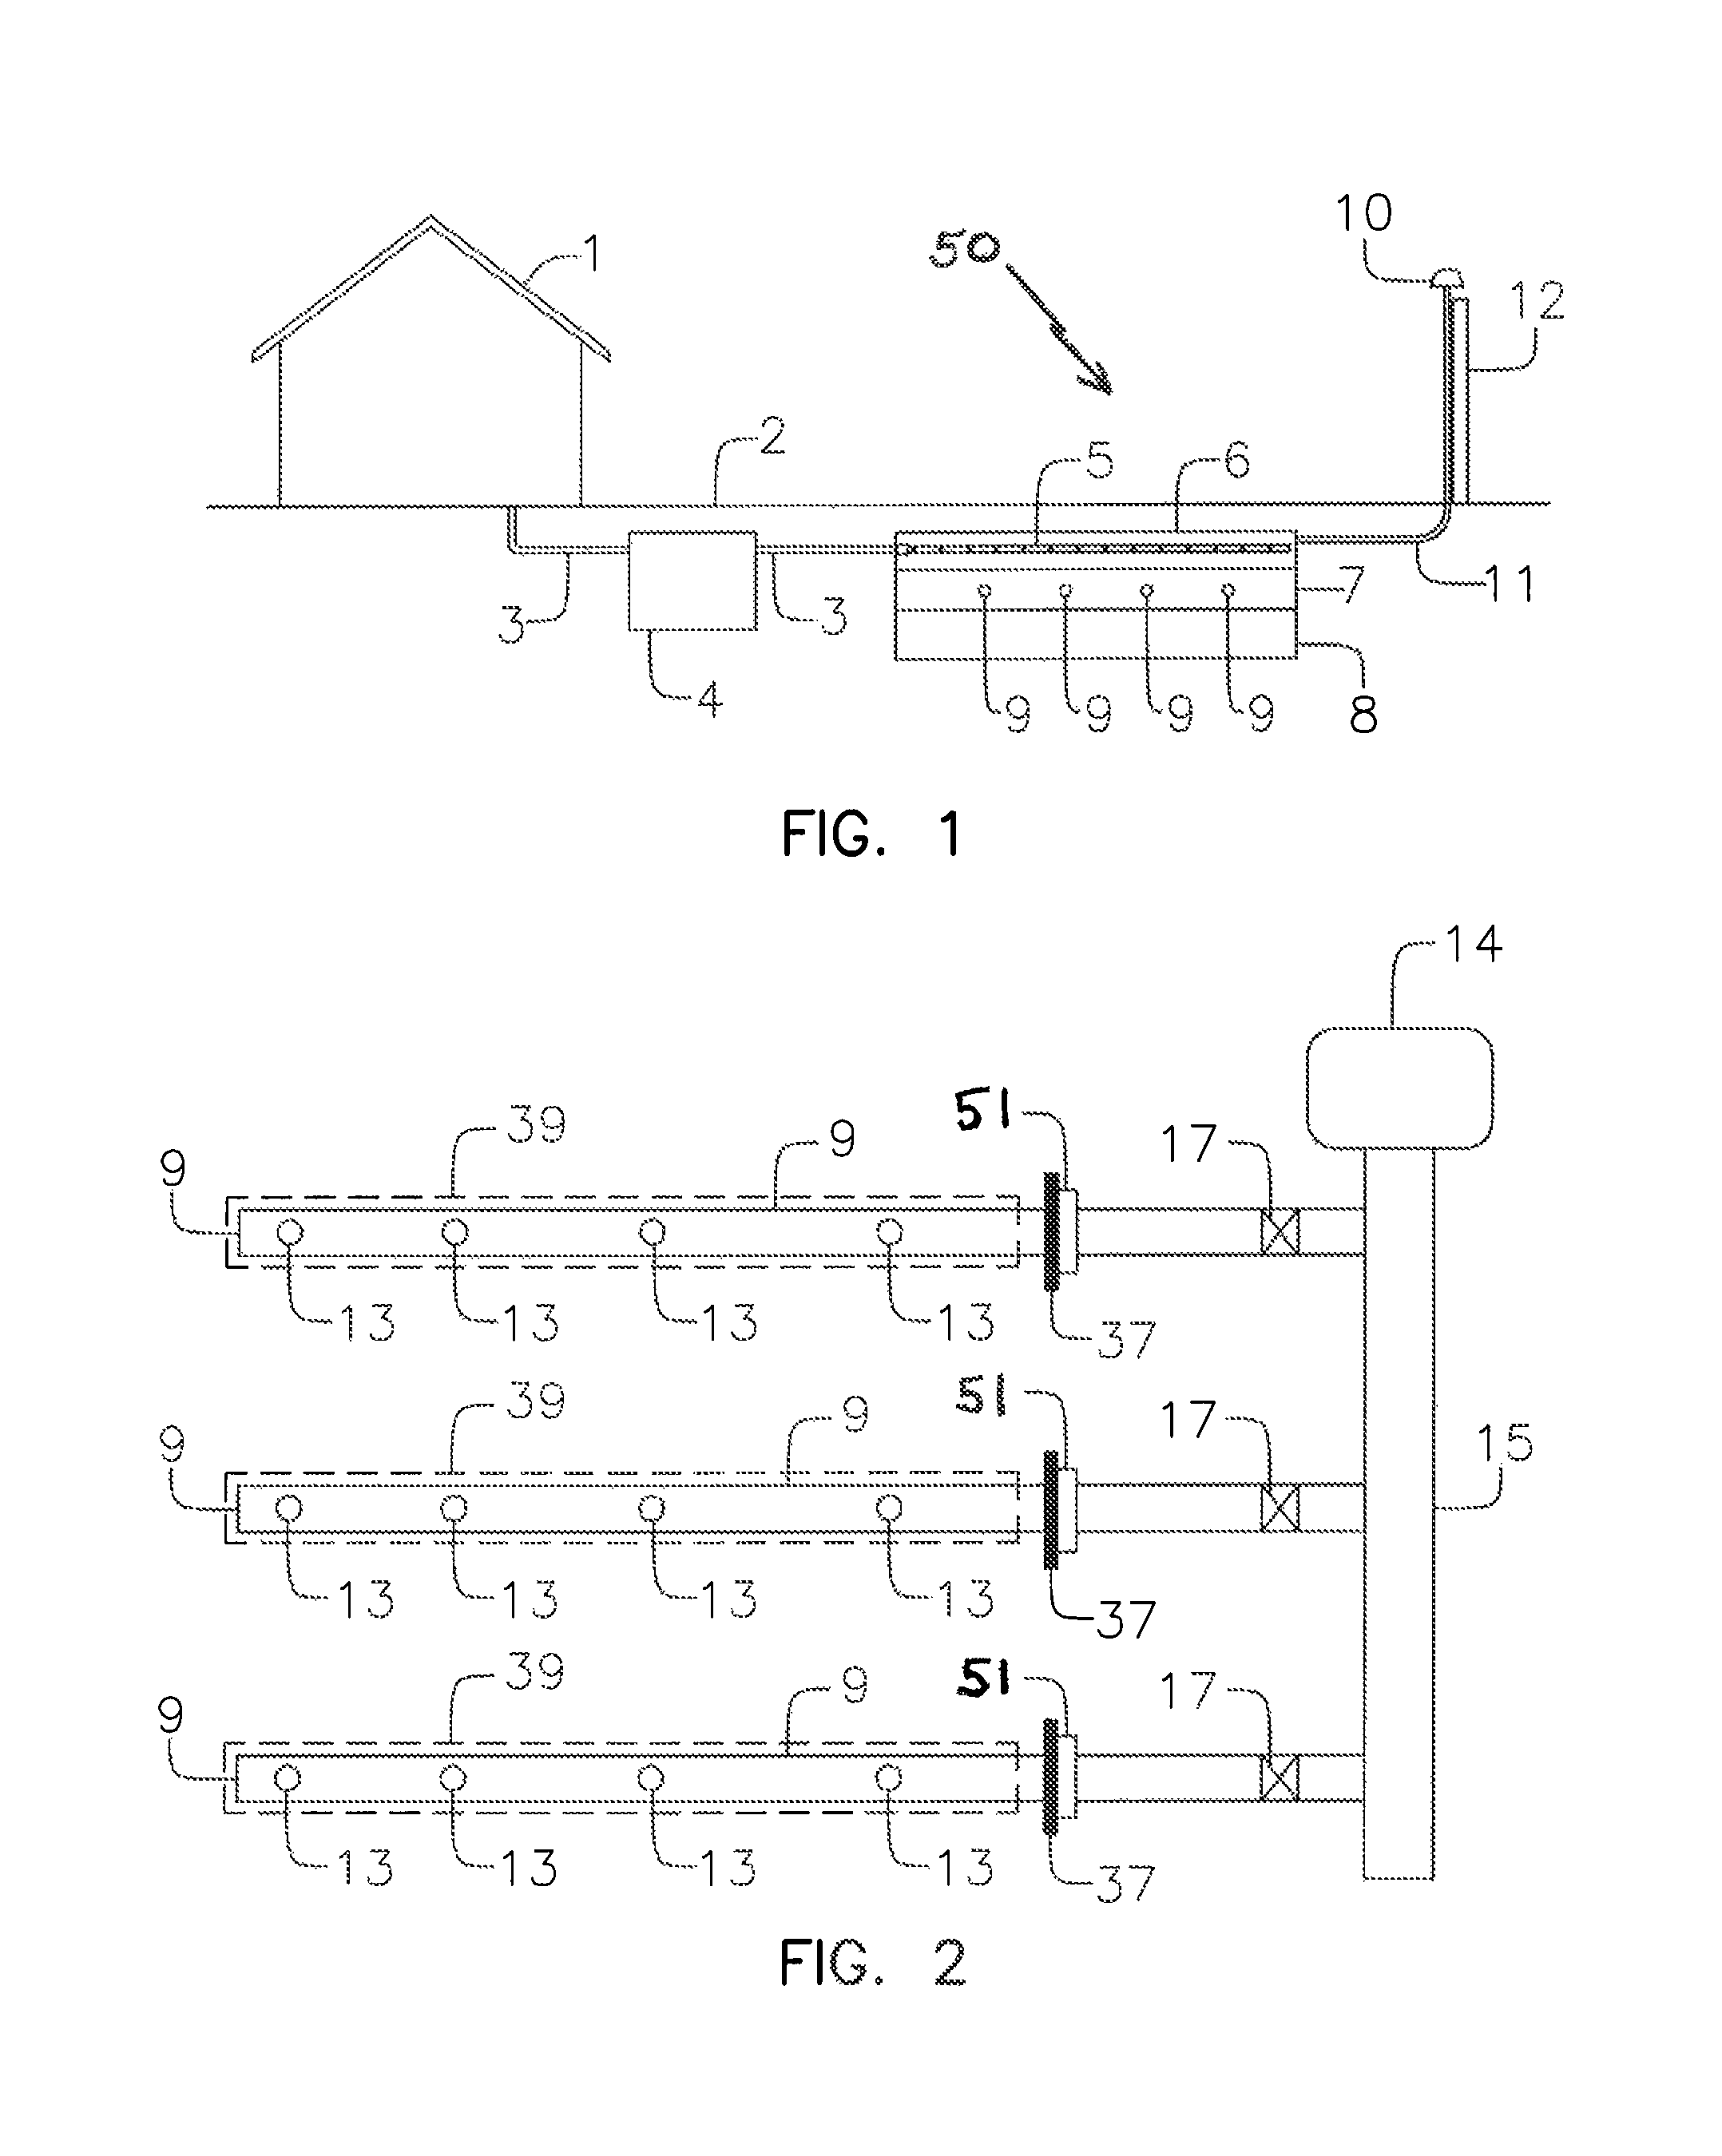 Method for enhanced aerobic activity and bio-mat control for onsite wastewater disposal systems